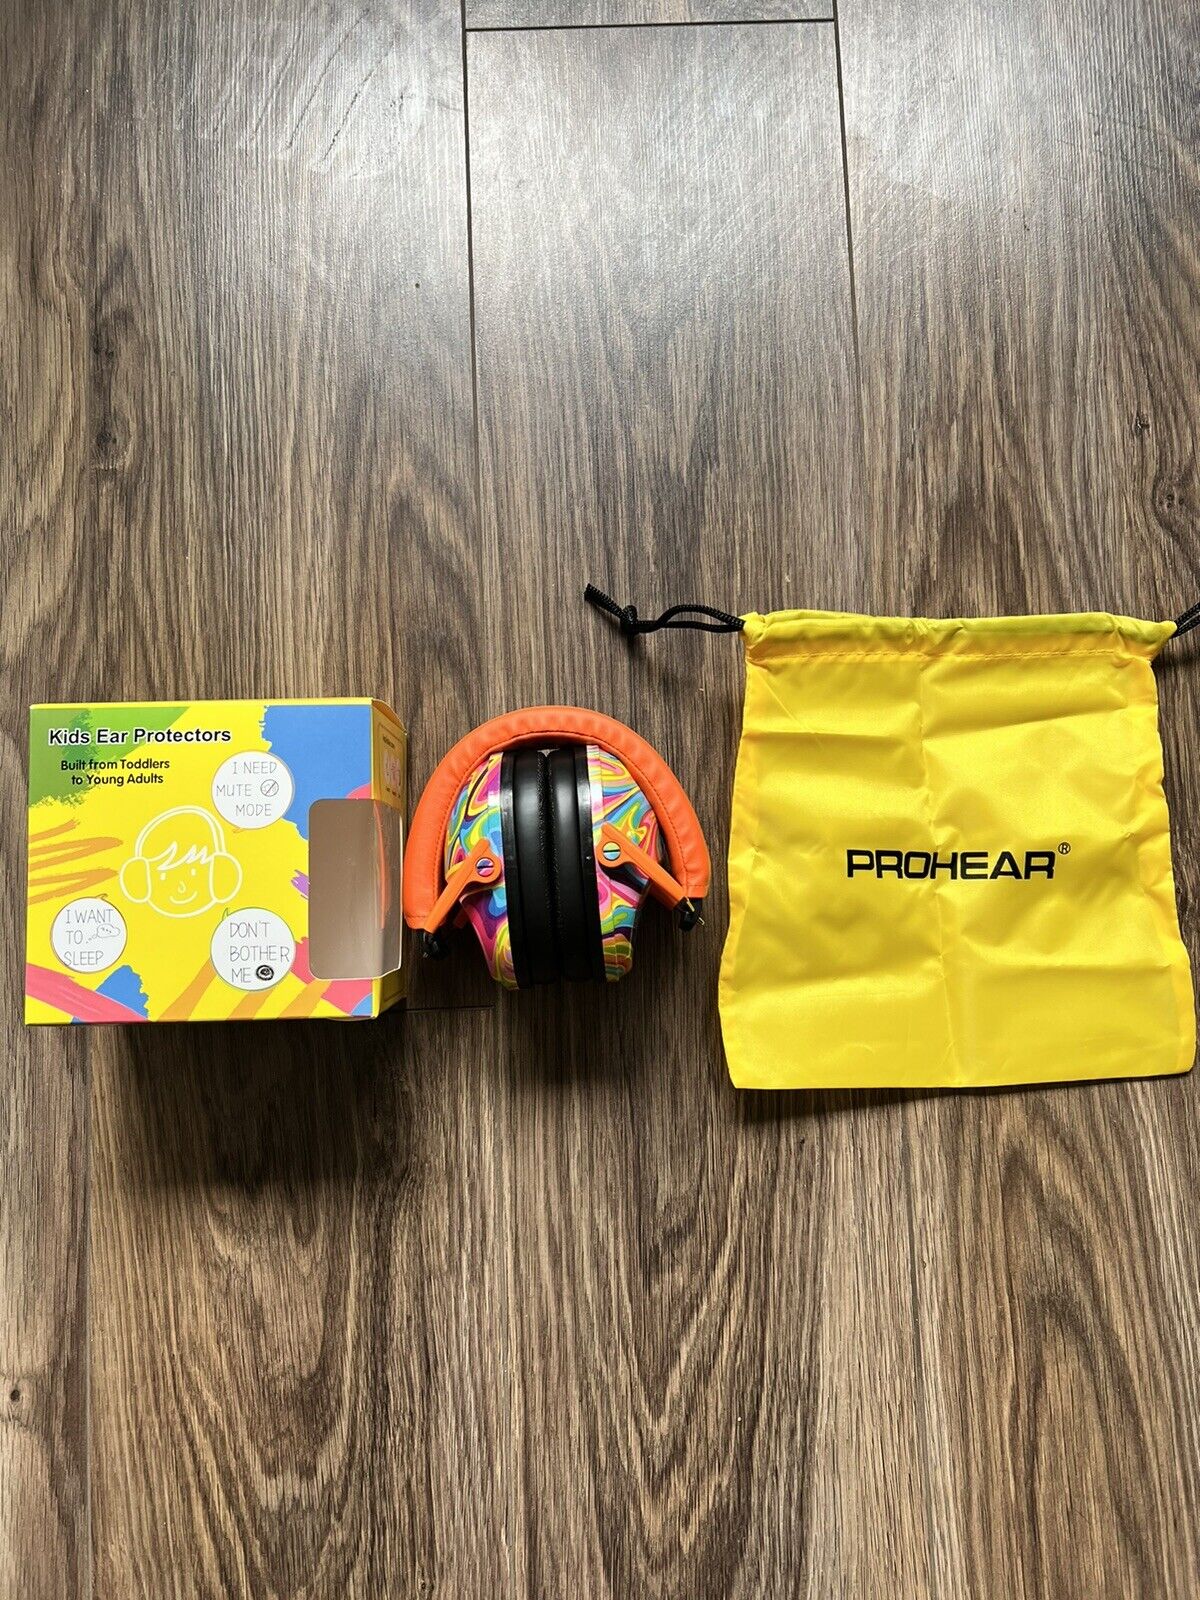 Prohear Kids Ear Protectors. New In Box. Toddlers Young Adults Concerts Firework